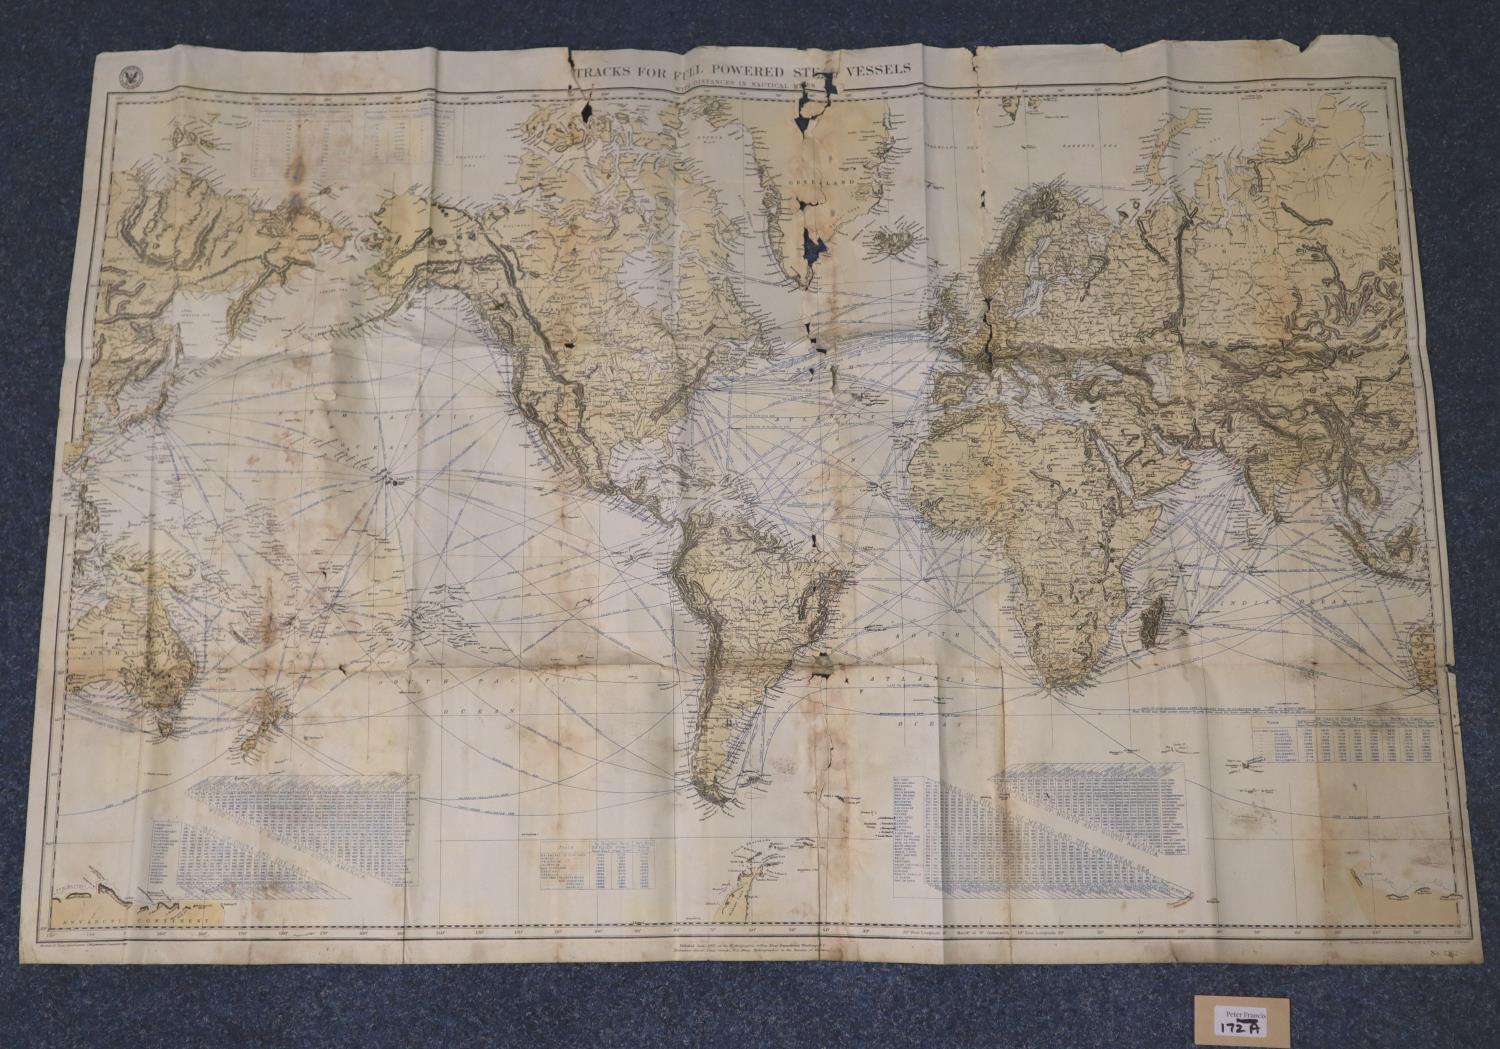 Paper foldable World map "Tracks for Full Powered Steam Vessels"Printed 1891 by Hydrographic Office,